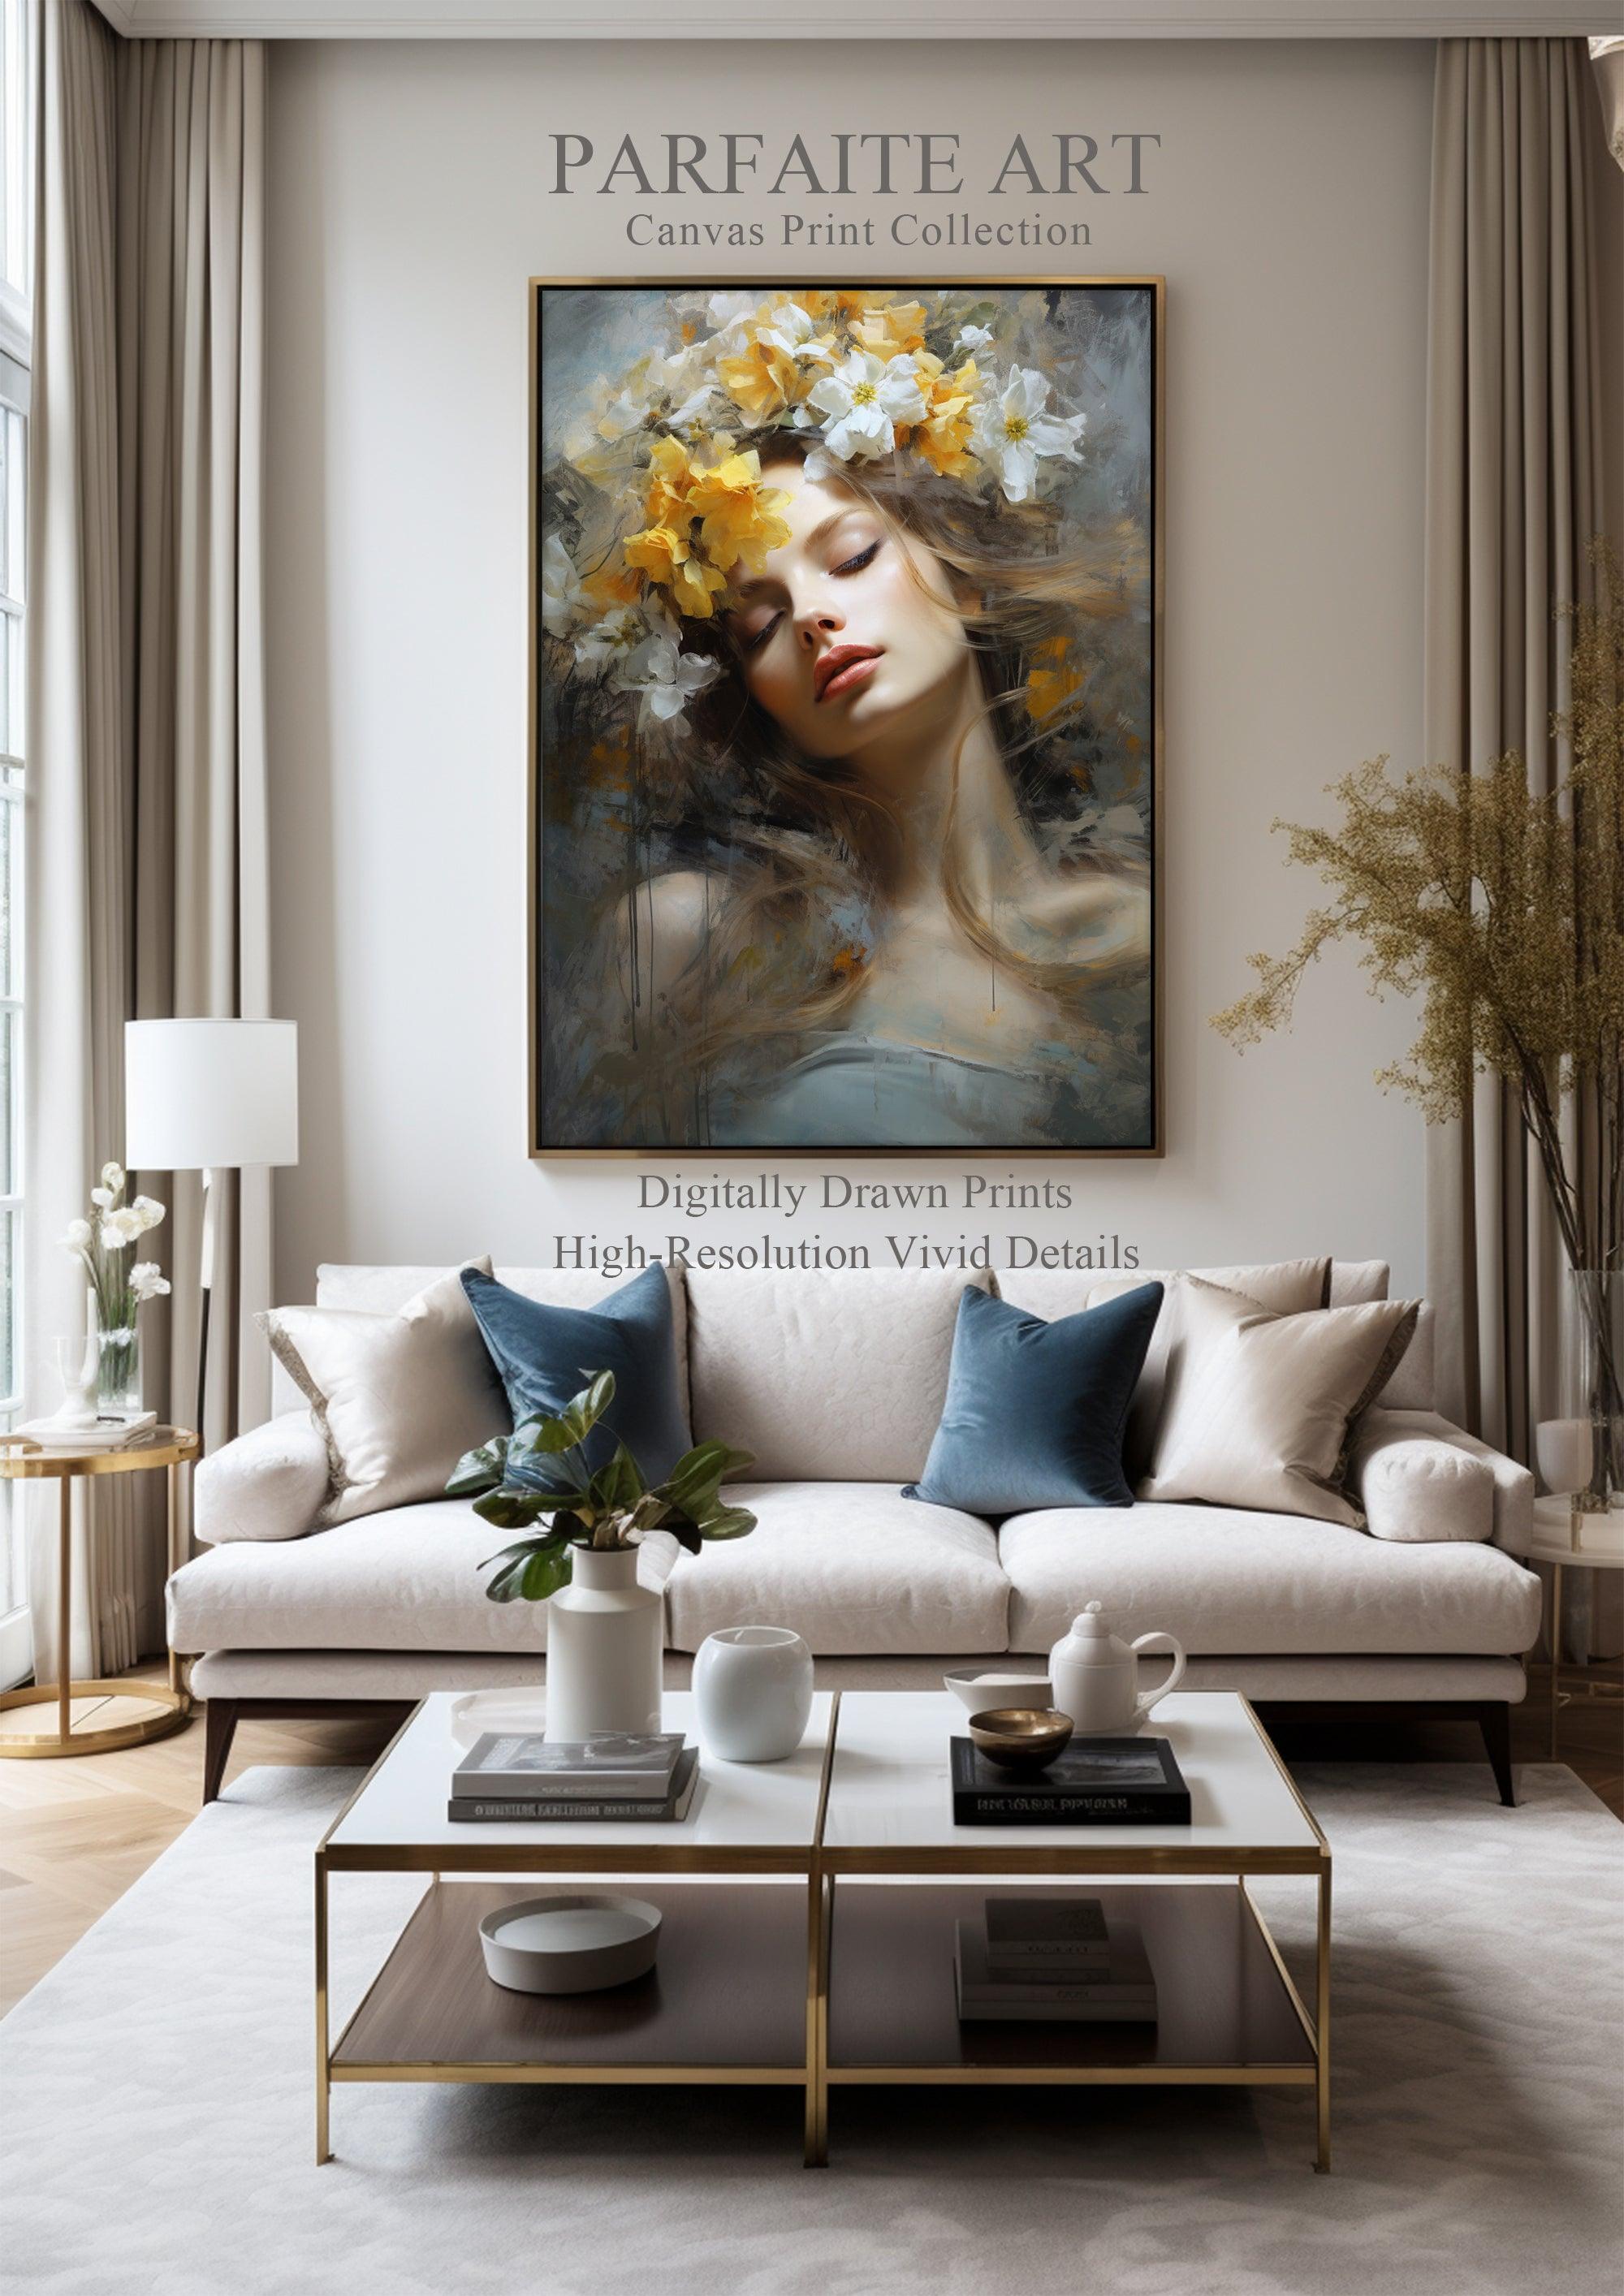 Beauty Woman Portrait，Hand Painted Colorful Decorative Canvas Artwork，Moody Wall Decor，Cotton Gloss Canvas Living Room Decor，High-Quality Waterproof Decorative Canvas Art